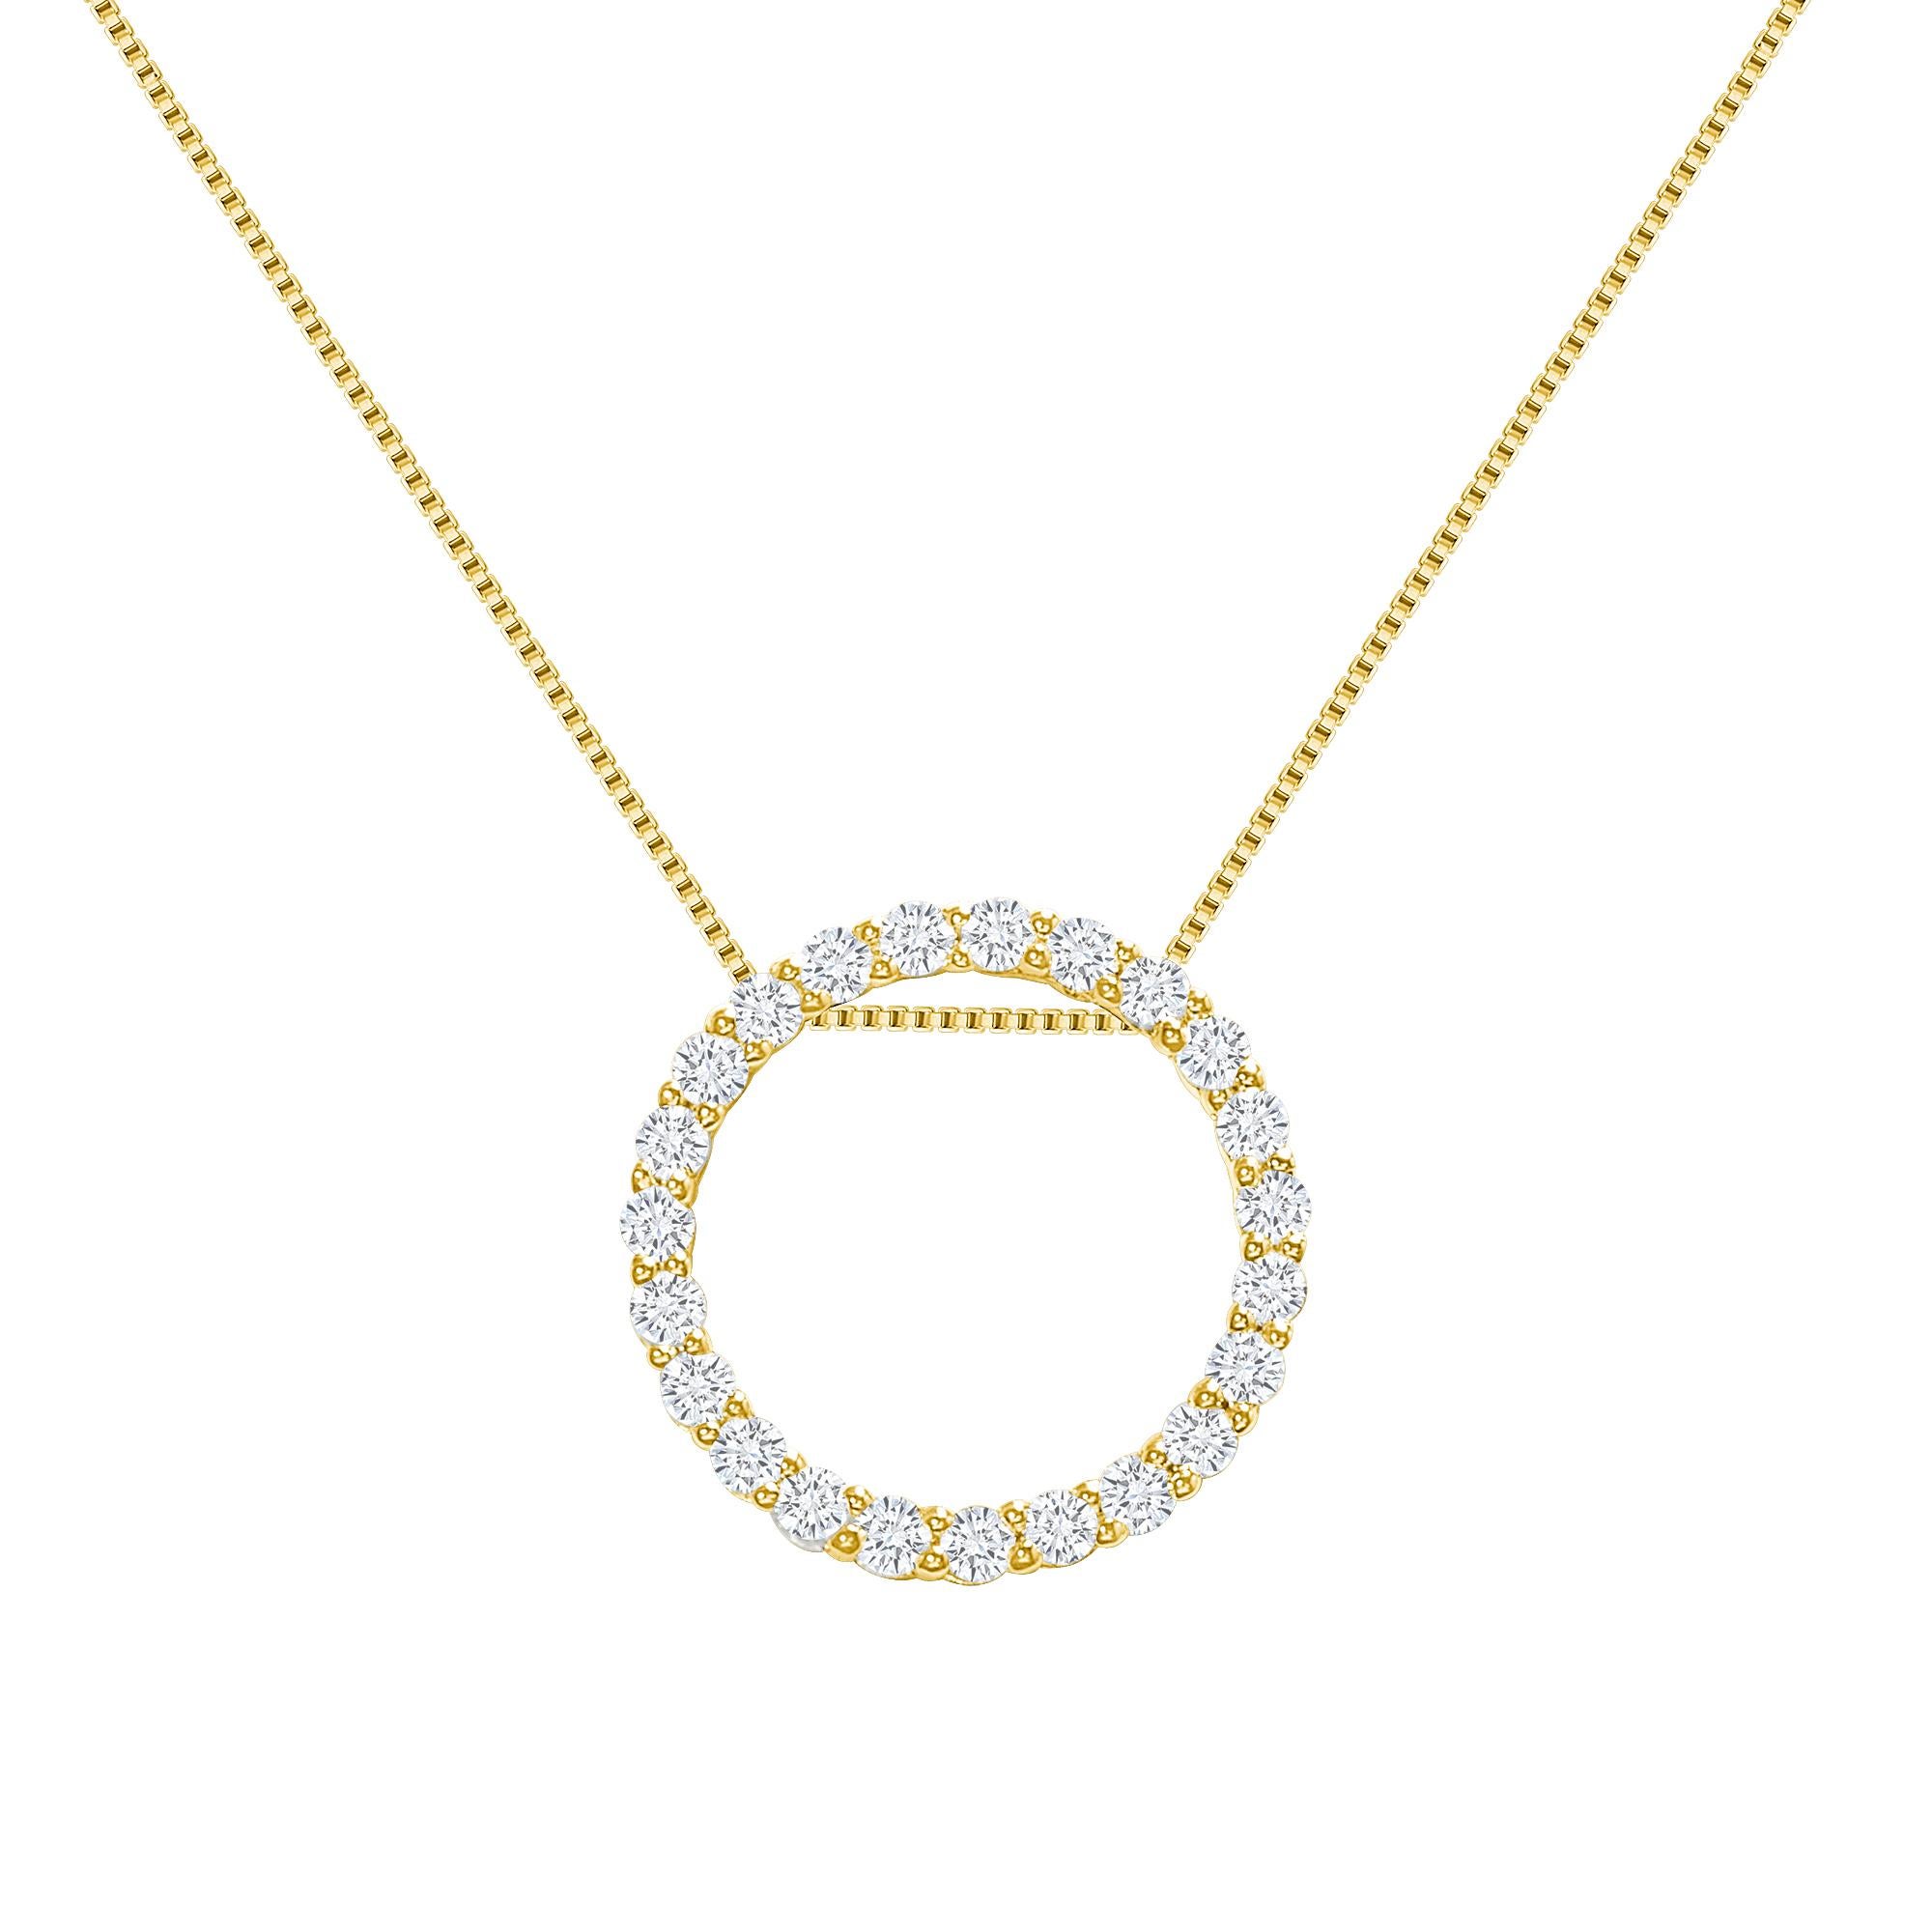 This diamond circle pendant provides a glowing chic look.
Metal: 14k Gold
Diamond Total Carats: 2 carat
Diamond Cut: Round Natural Diamonds (Not Lab Grown)
Diamond Clarity: VS
Diamond Color: F-G
Color: Yellow Gold
Necklace Length: 18 inches